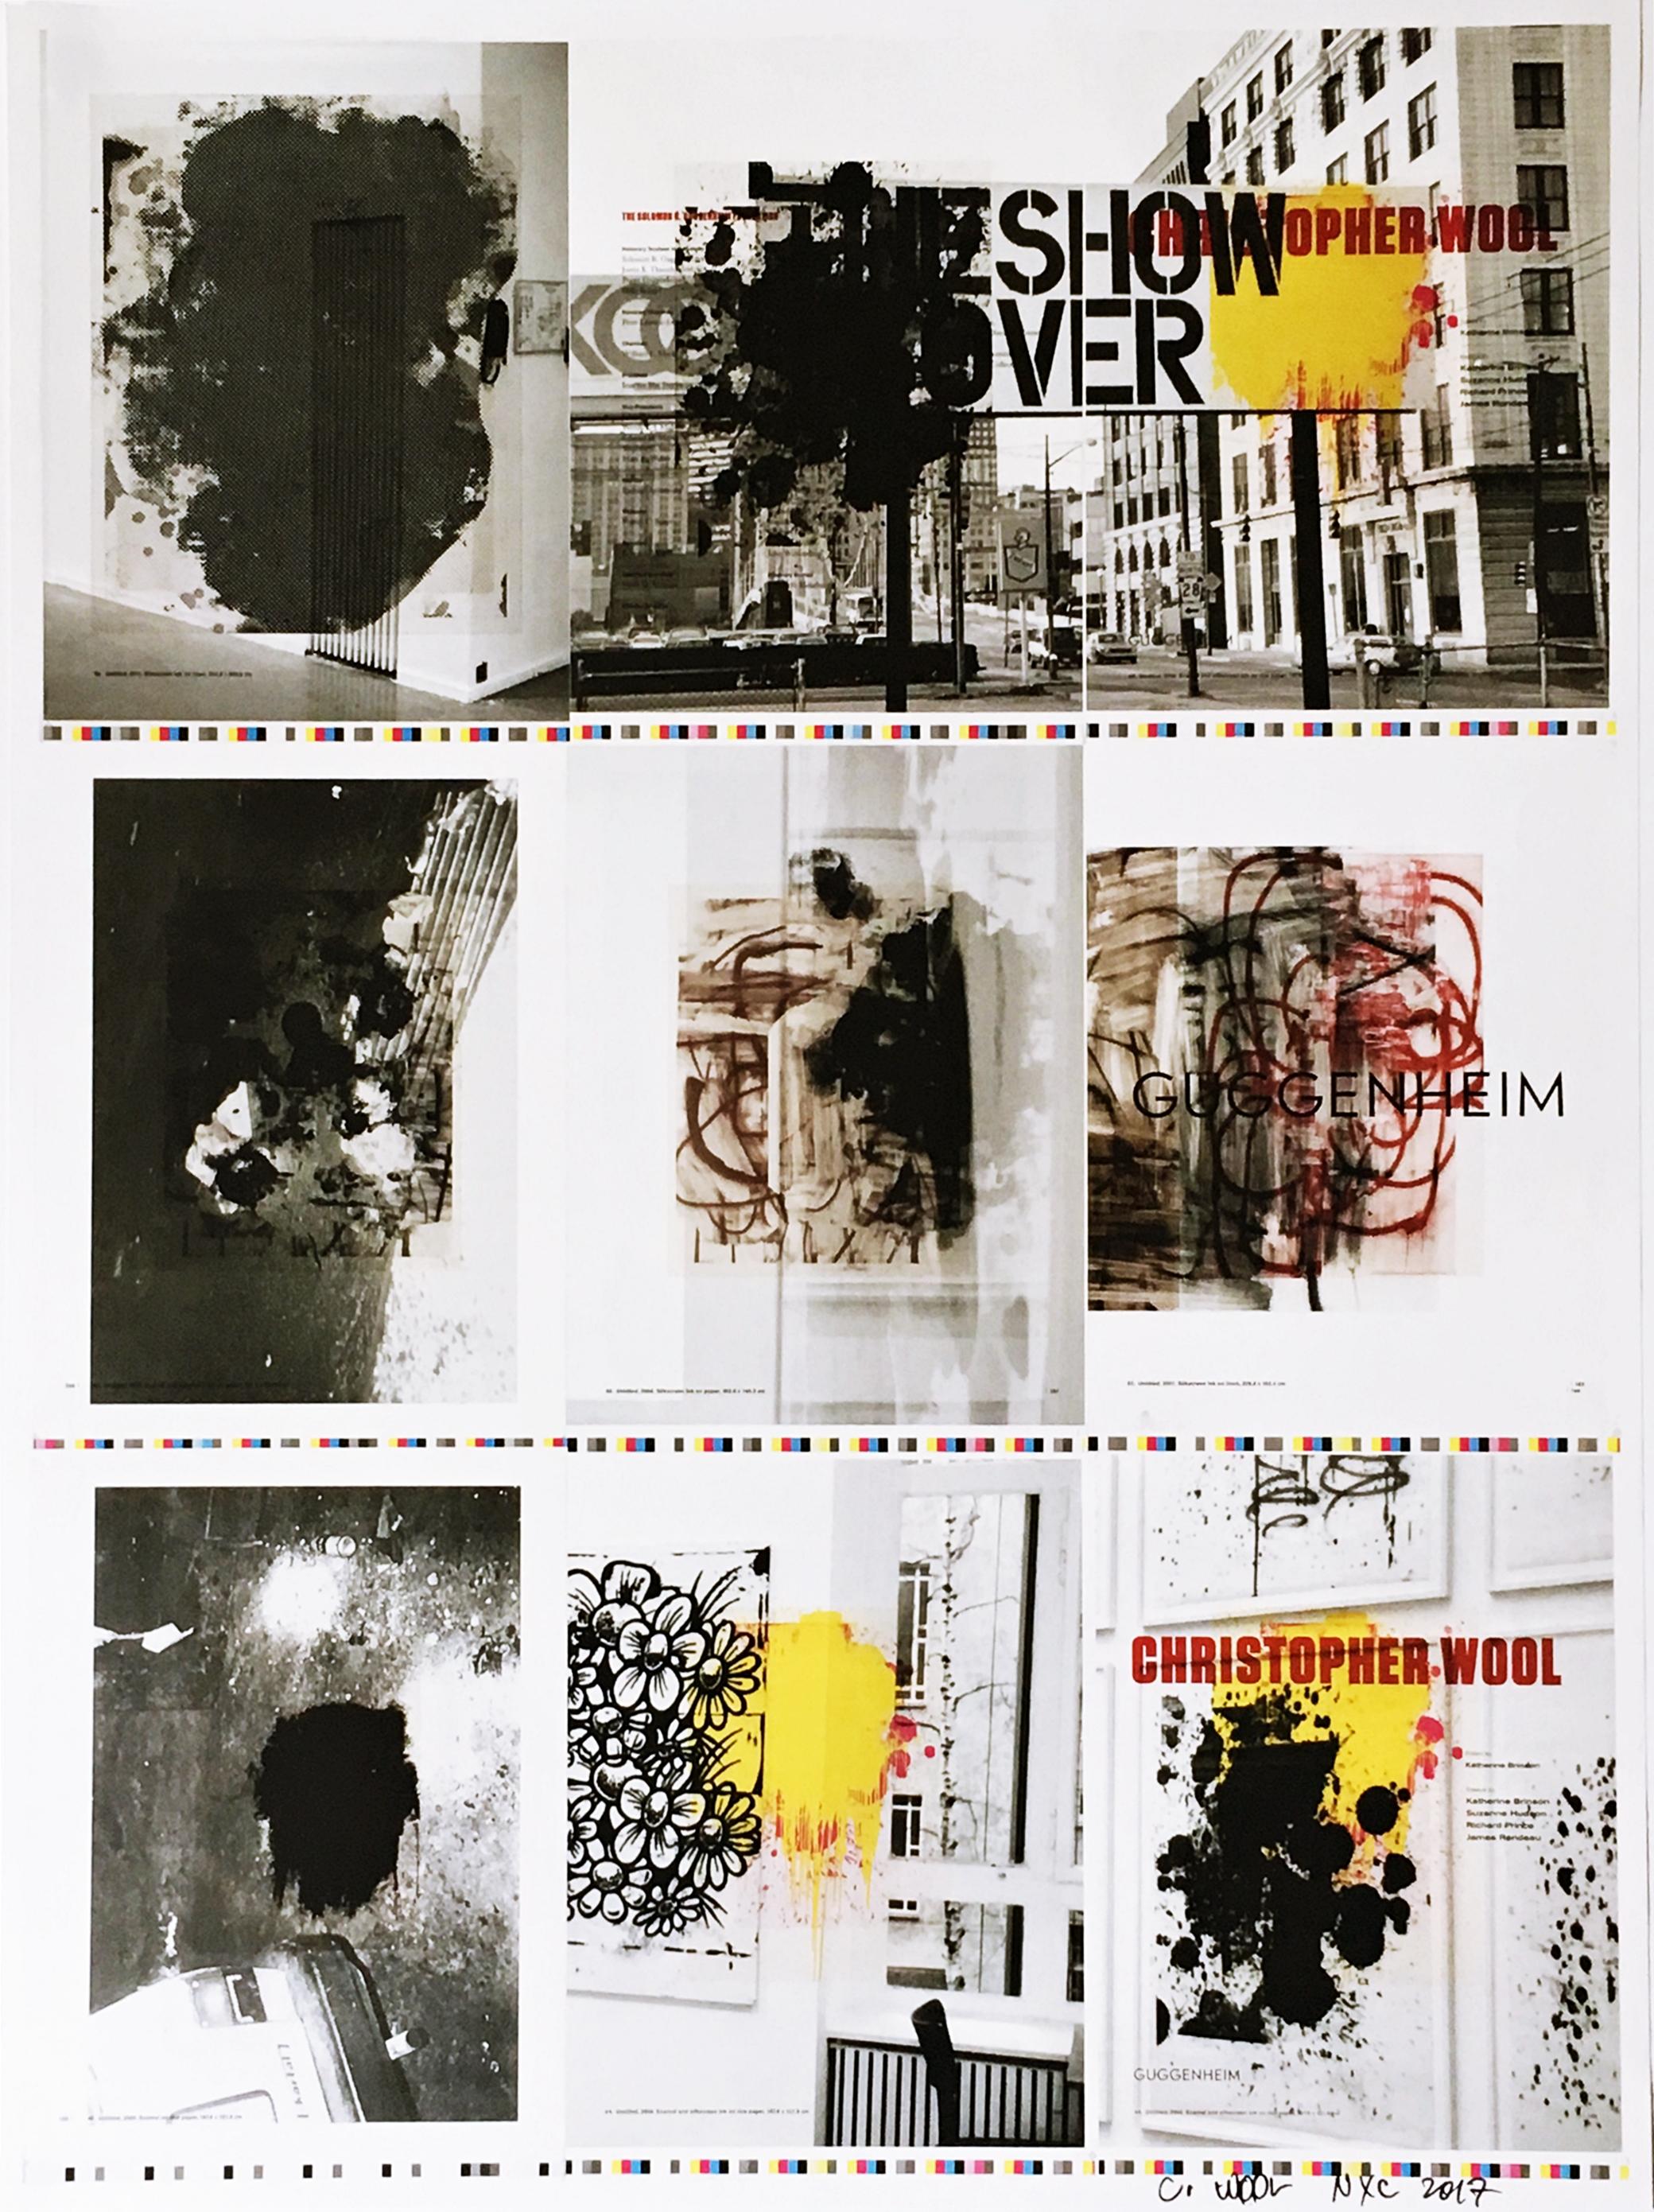 Christopher Wool
The Show is Over Poster (Hand Signed by Christopher Wool), 2013-
Offset lithograph poster
Hand signed and dated 2017 on lower front. 
This work was uniquely signed in person by Christopher Wool for the present owner
33 1/2 × 25